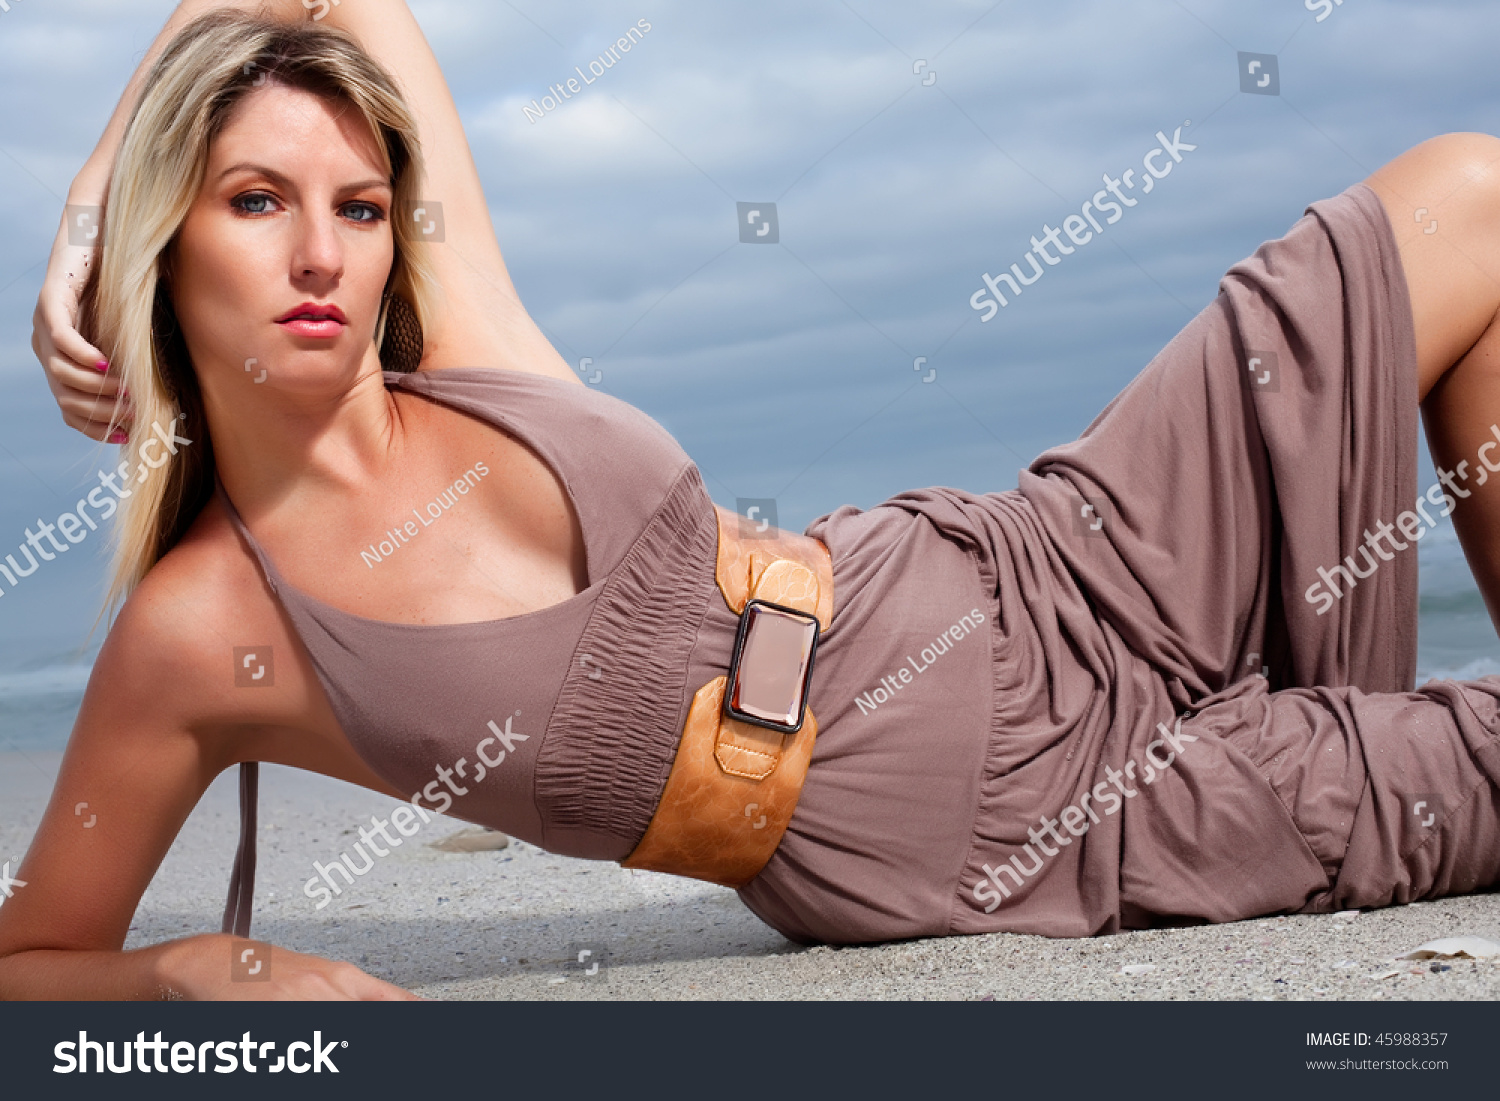 Good Looking Blond Woman Wearing A Brown Dress On The Beach Stock